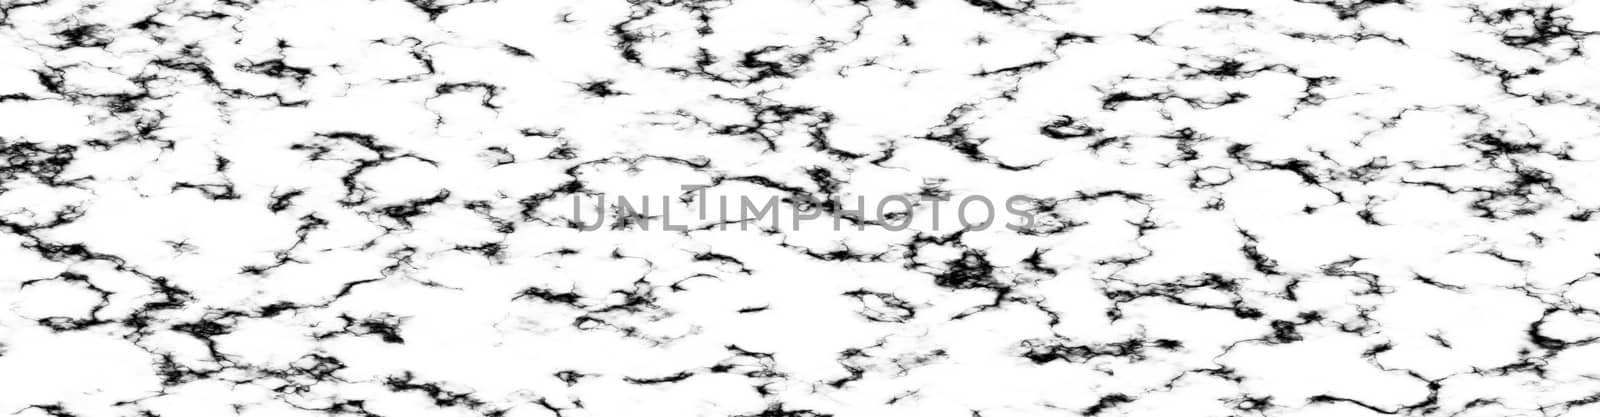 panorama black white marble and pattern texture luxury interior wall tile